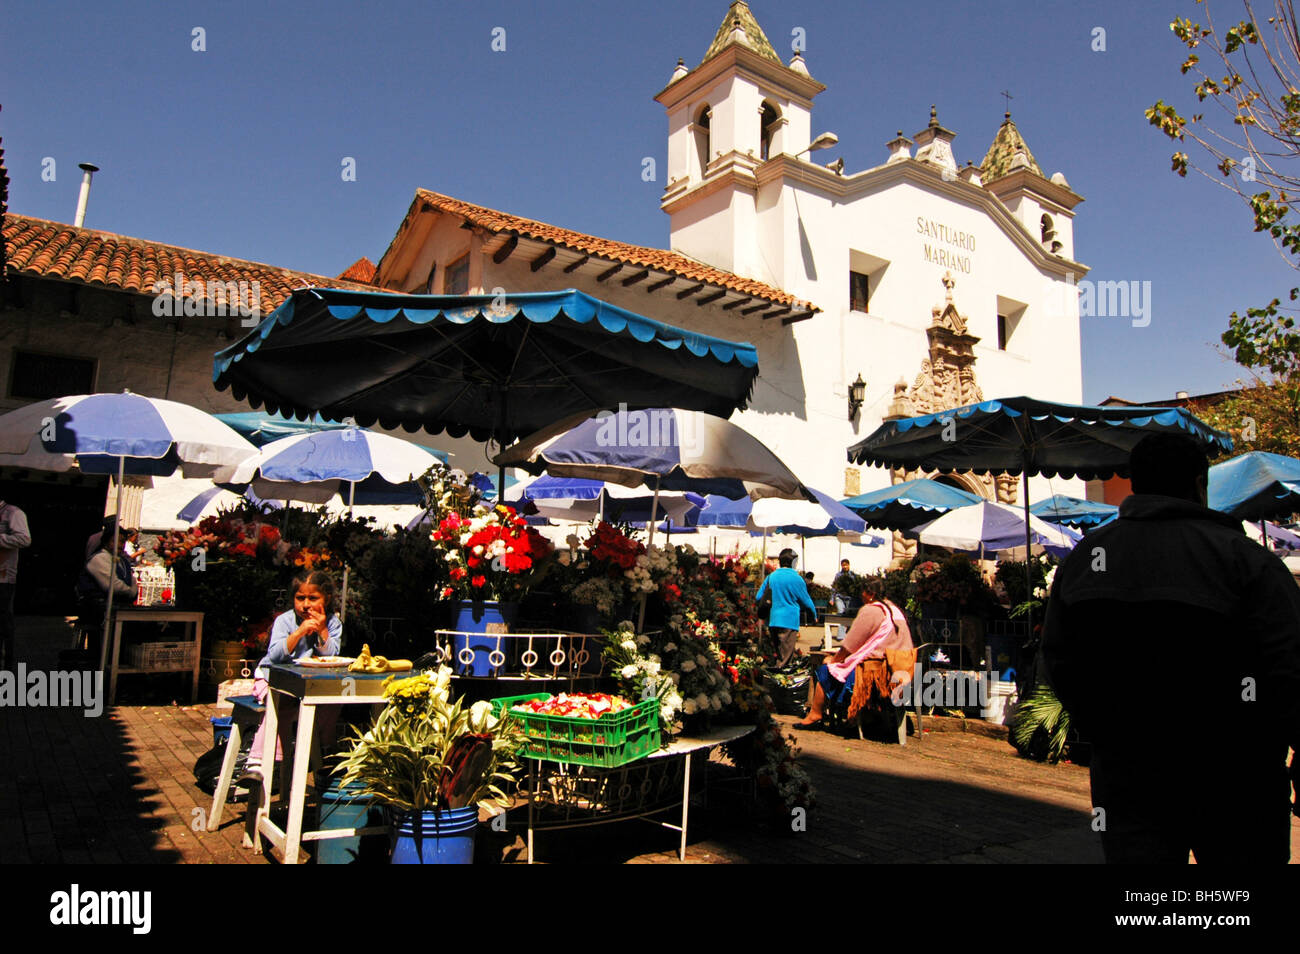 Ecuador, Cuenca, view of a flower market under the shade of sun umbrellas on the place in front of the white Monastery of El Car Stock Photo